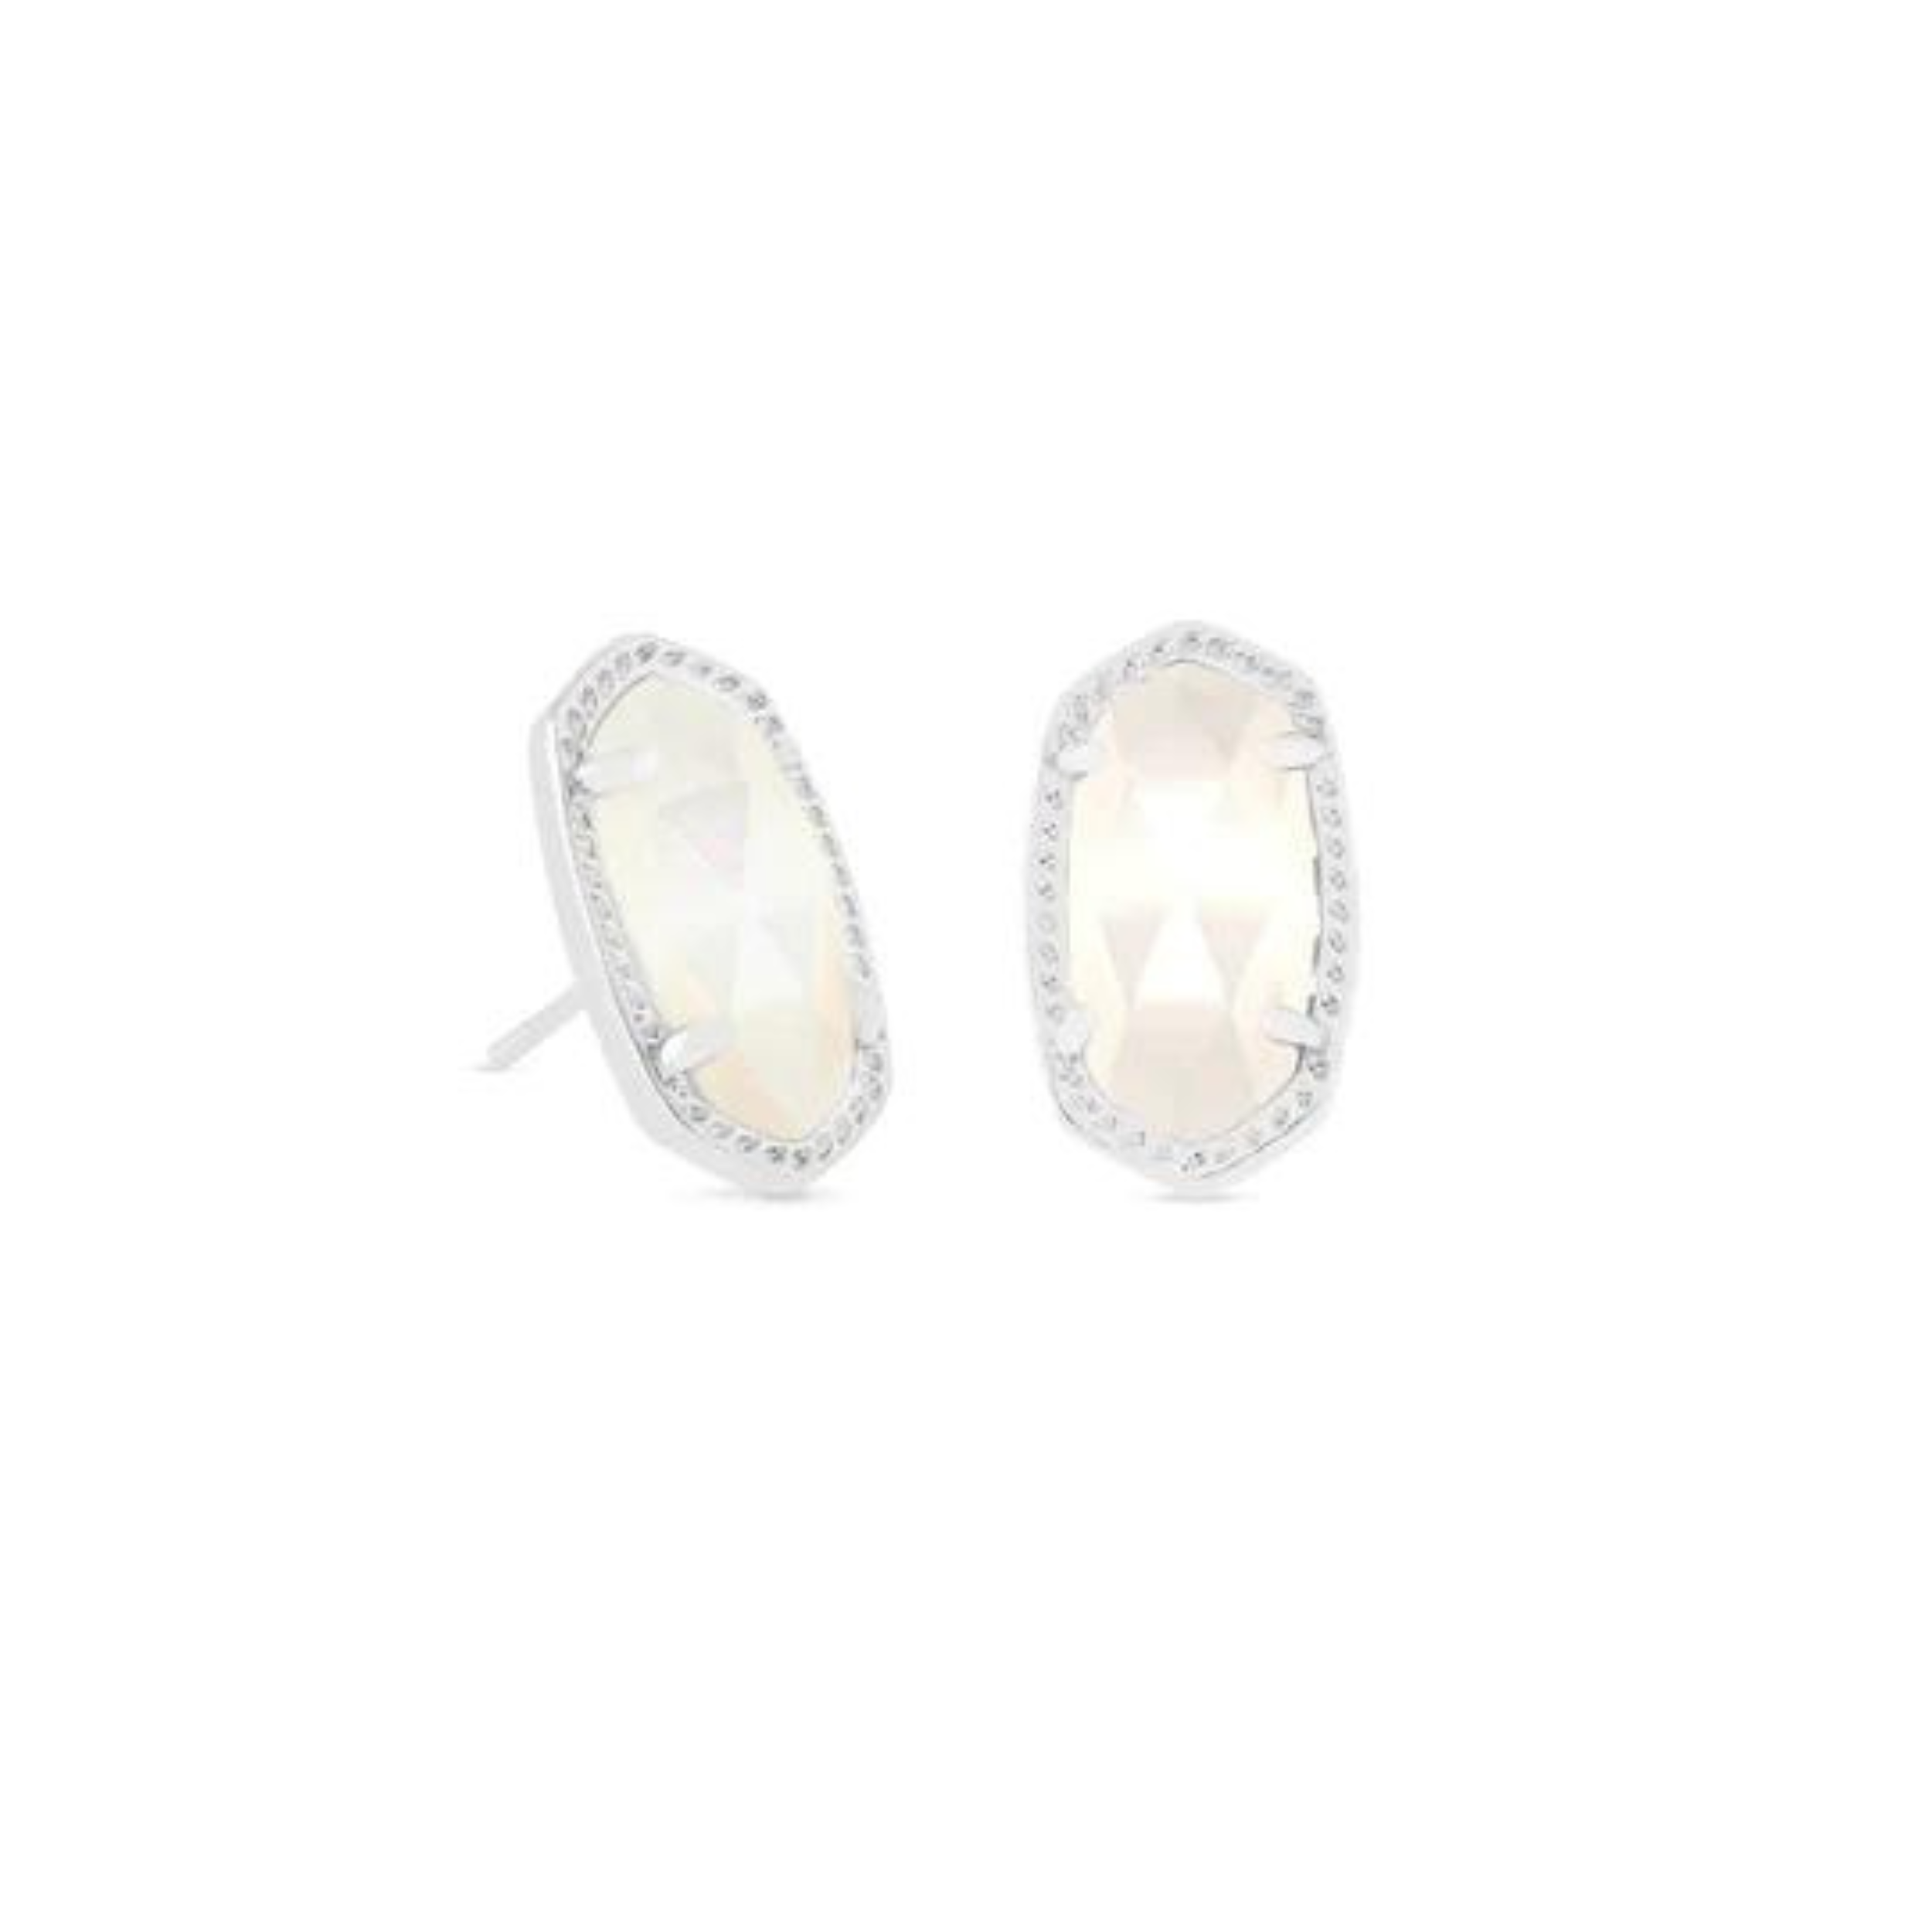 Silver stud earrings with ivory pearl stones, pictured on a white background.